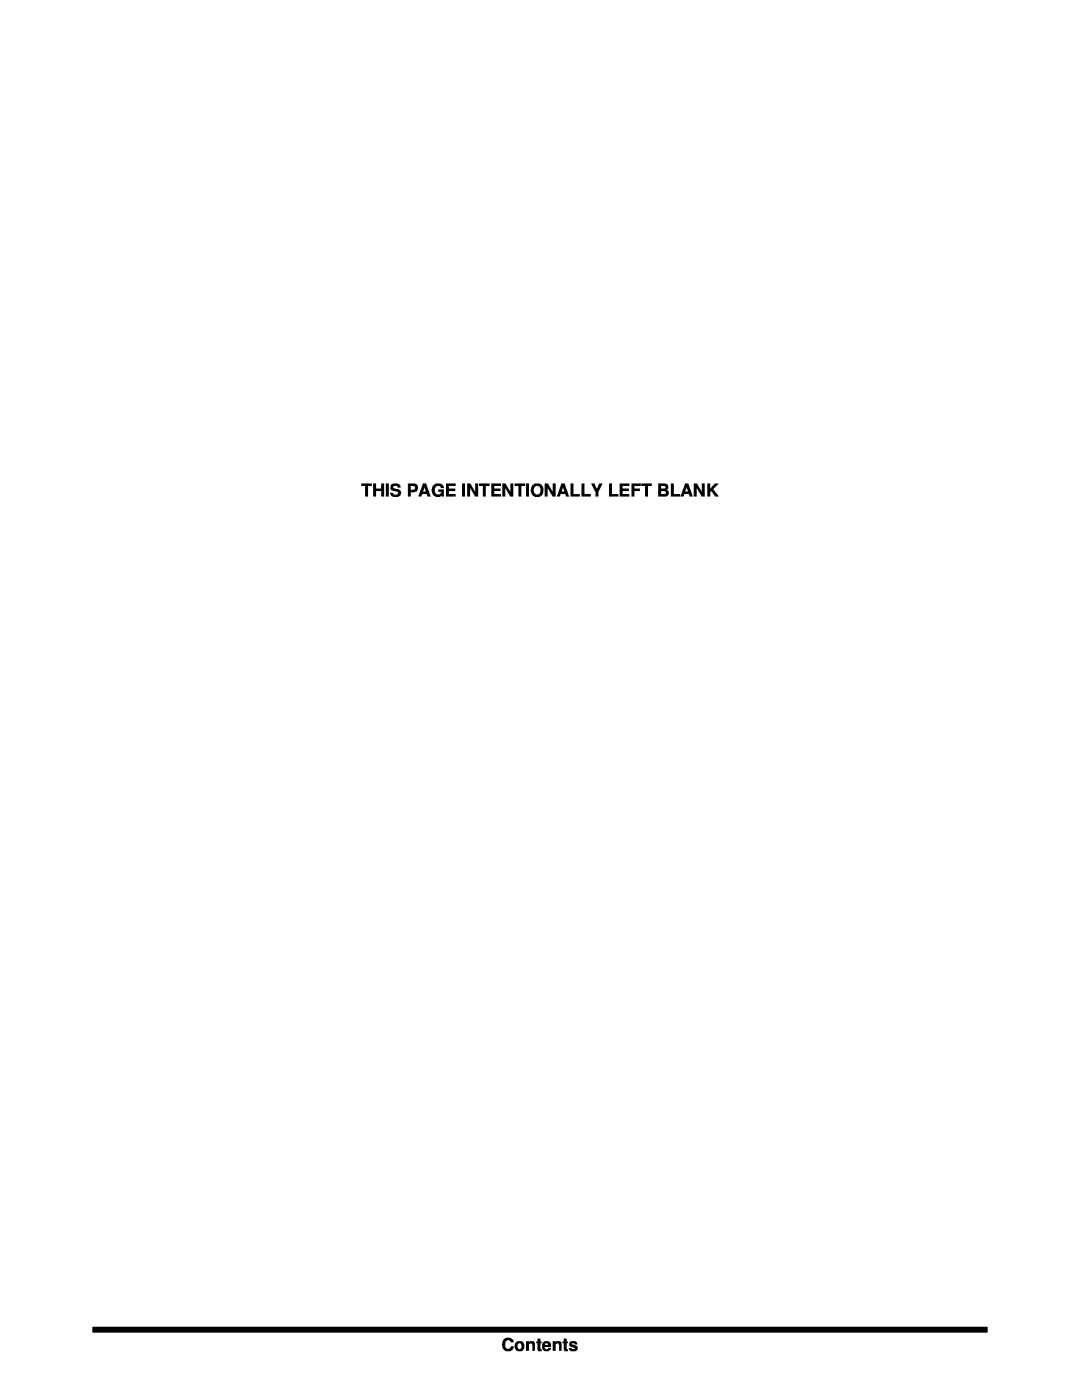 Sierra Monitor Corporation 5100-05-IT, T12020, 5100-06-IT, 5100-04-IT This Page Intentionally Left Blank, Contents 